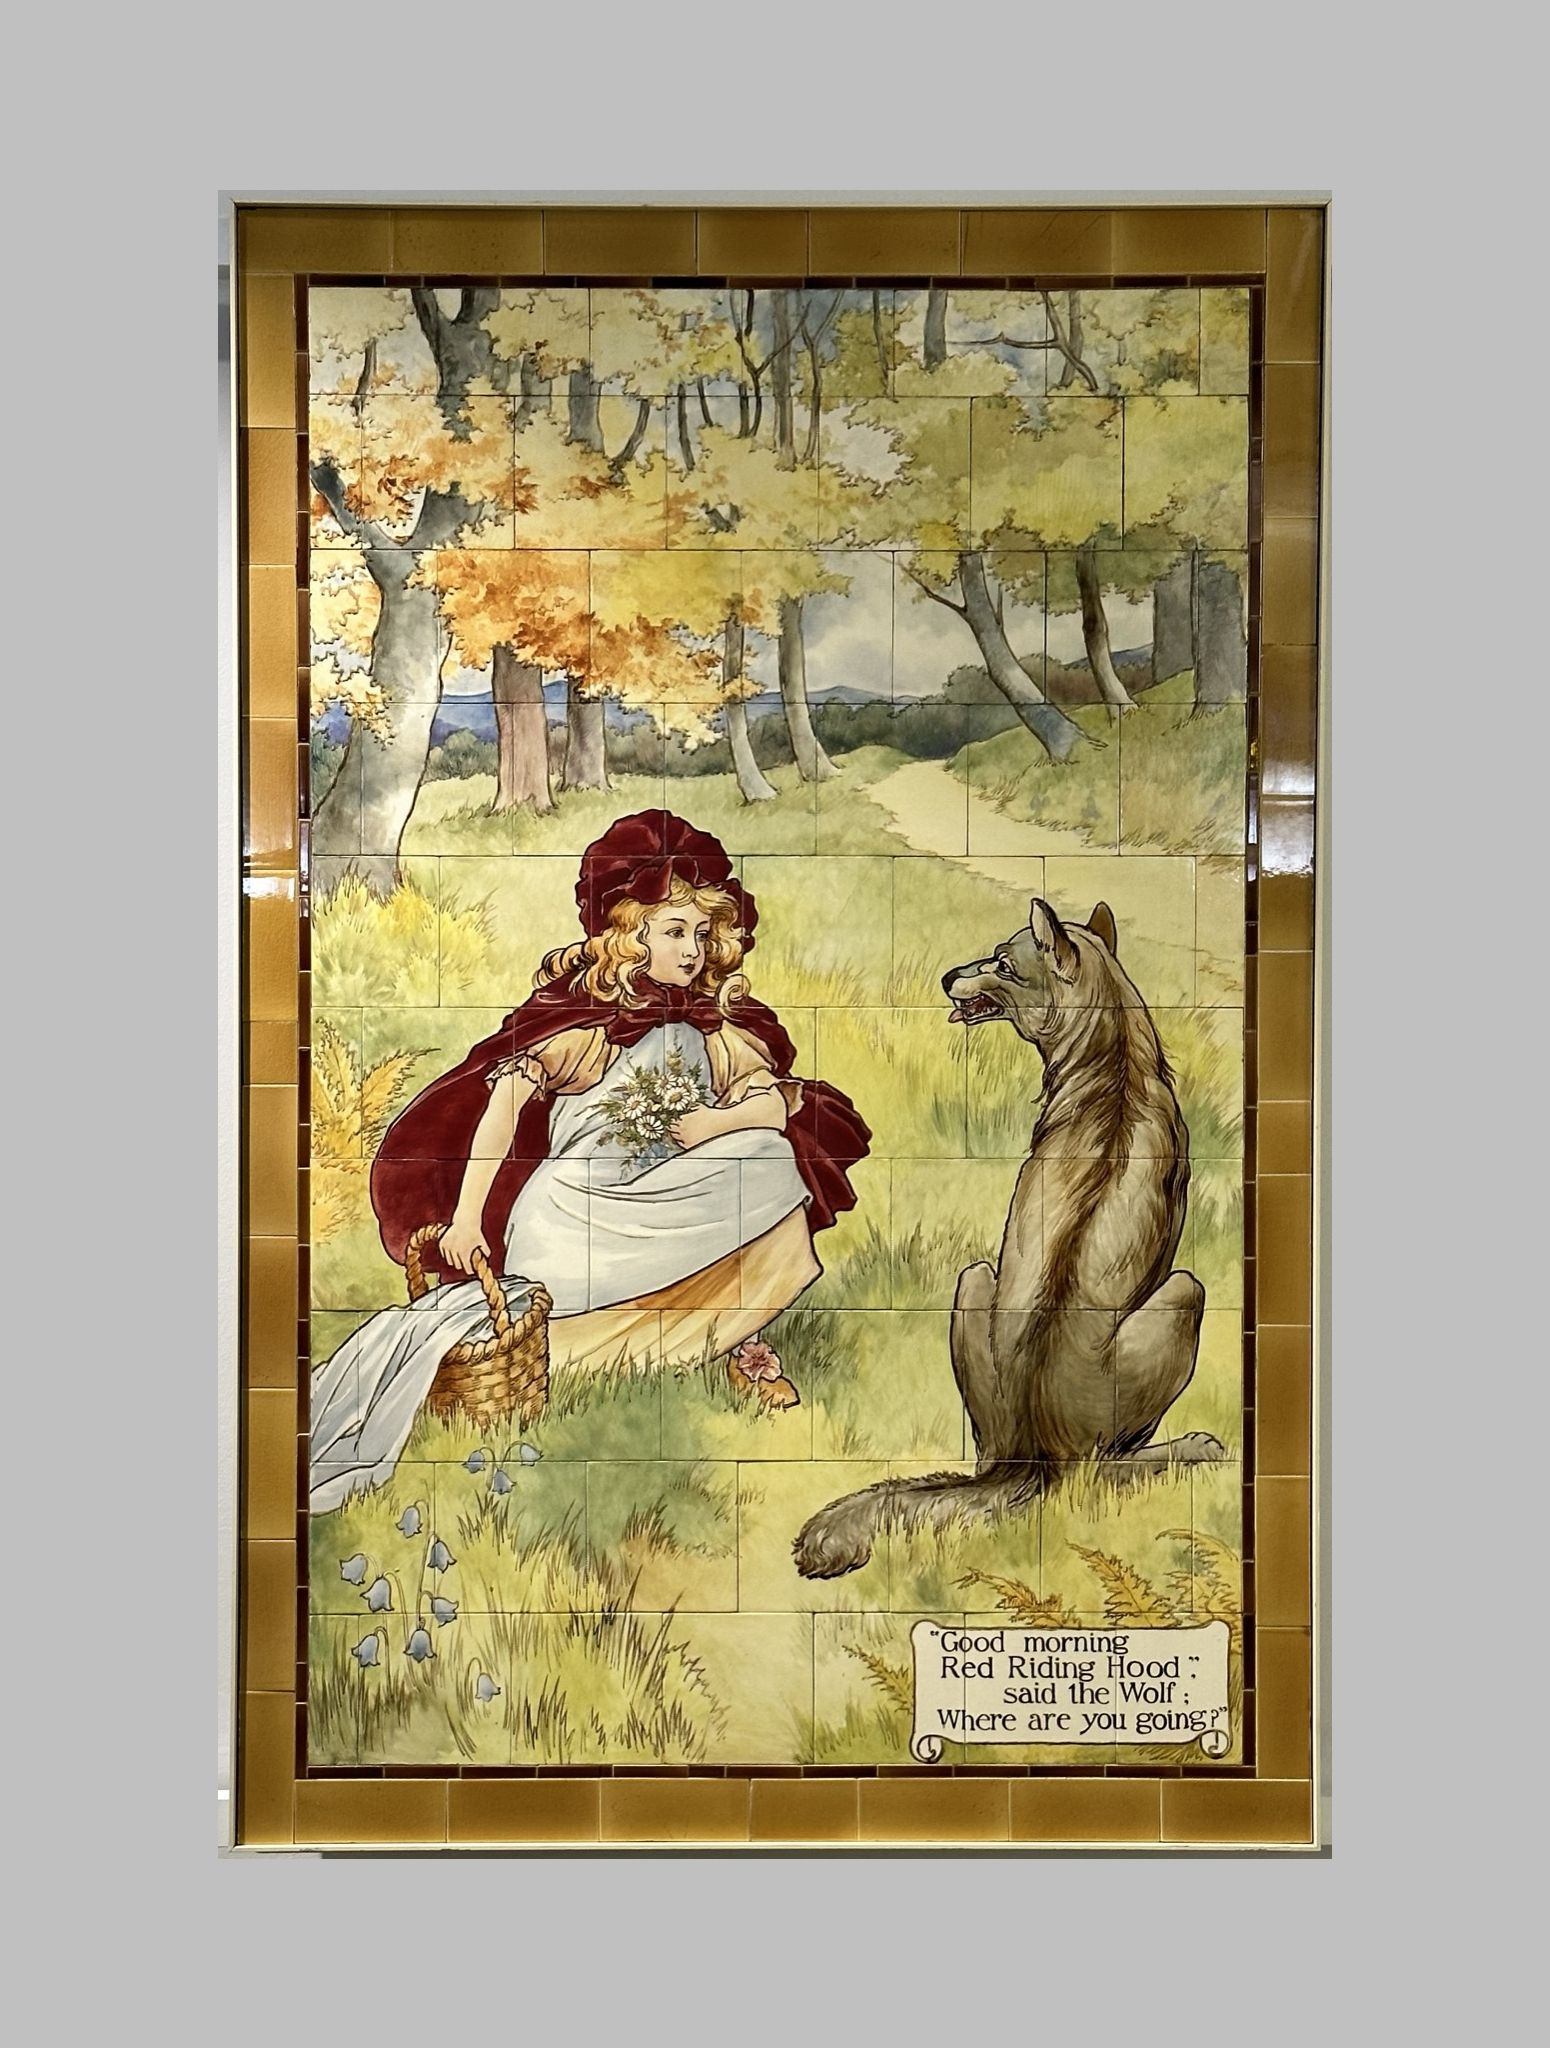 Little Red Riding Hood scene painted on Doulton tiles (commissioned around 1900) from the Evelina Children's Hospital displayed in the long corridor at St Thomas' hospital.